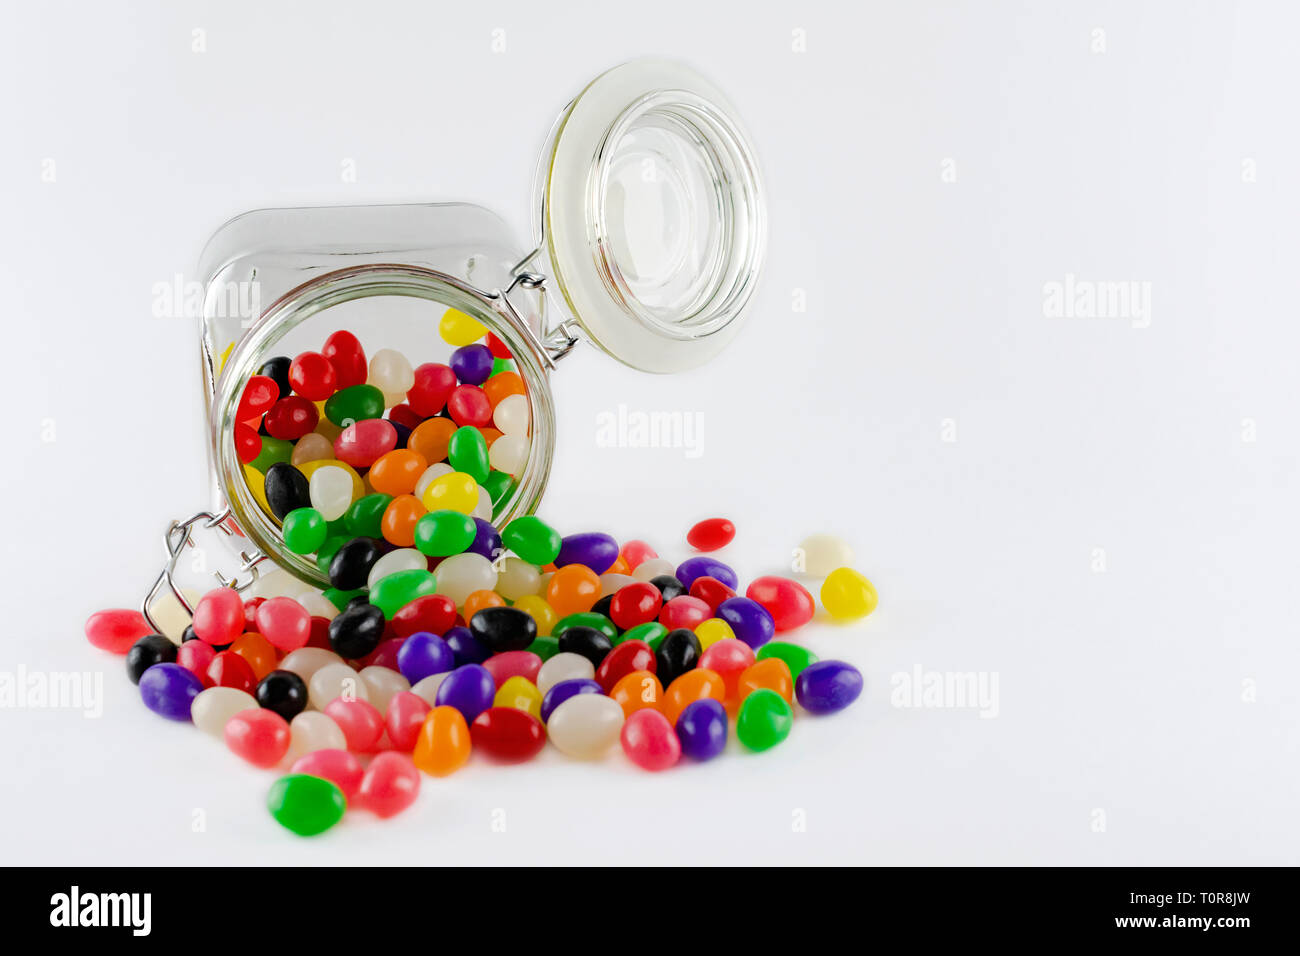 Jar of spilled jelly beans isolated on white background.  Copy space to the right. Stock Photo